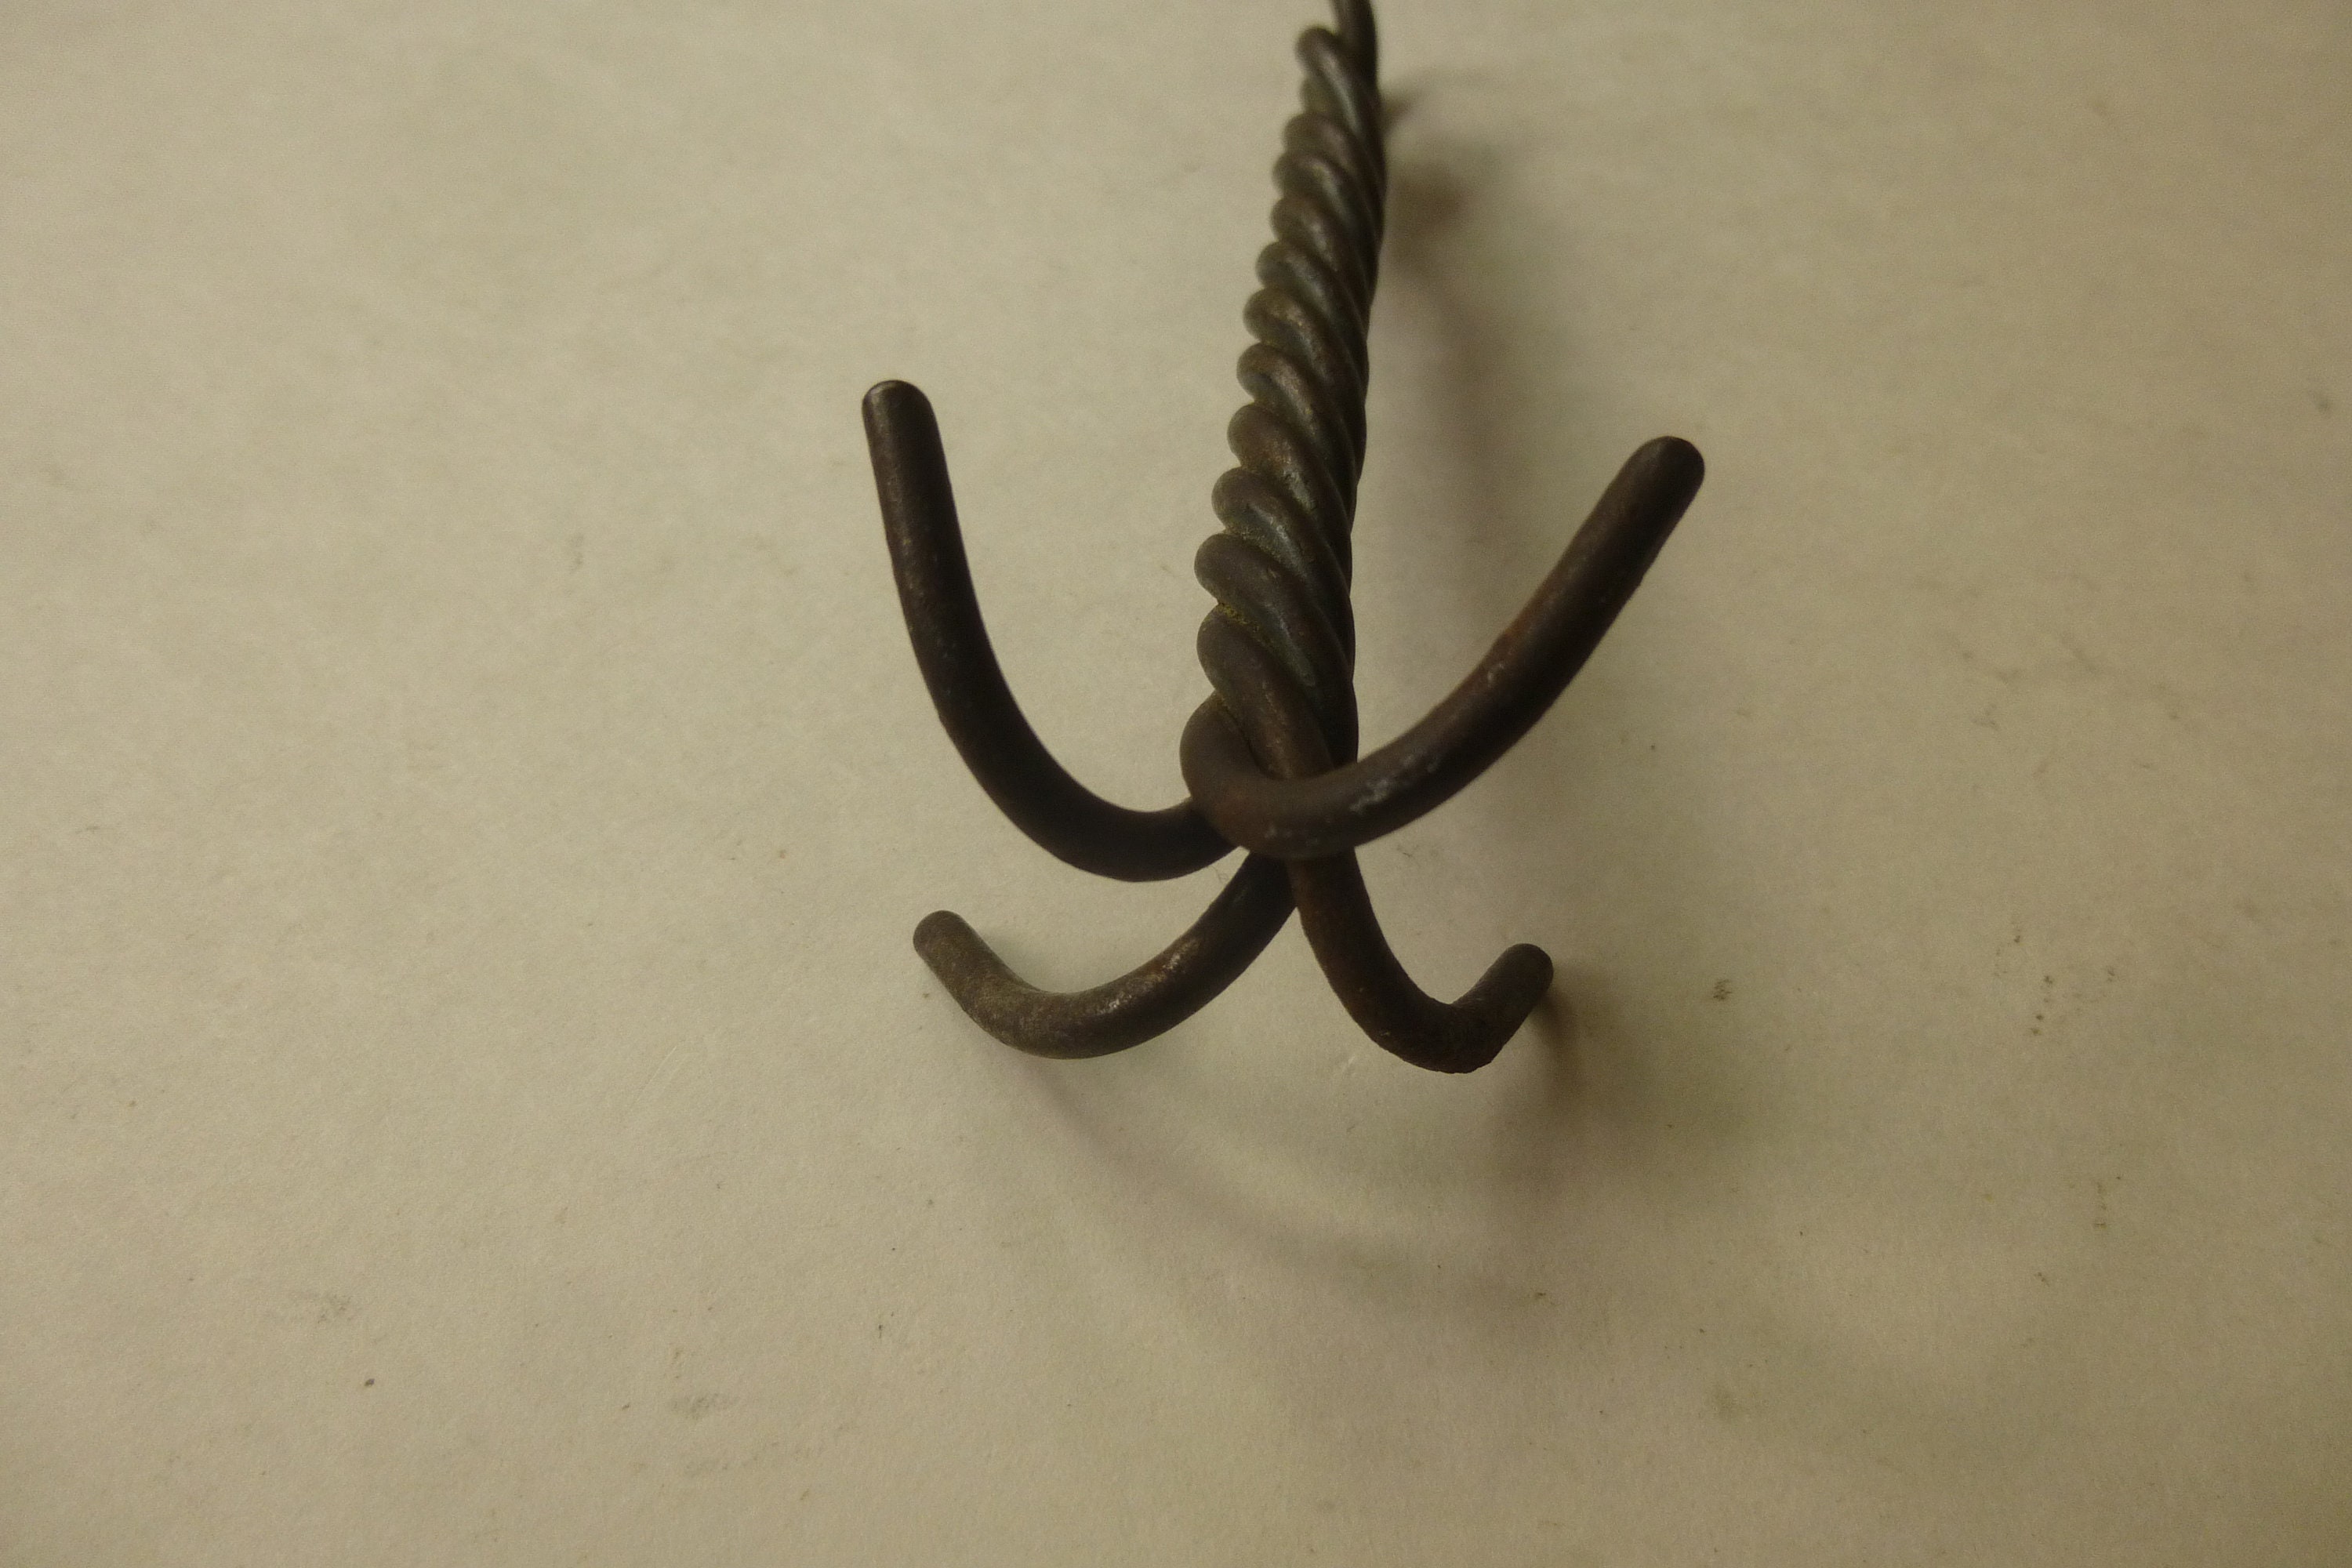 Antique Grappling Hook Drag and Salvage Hook Easily Repurposed for